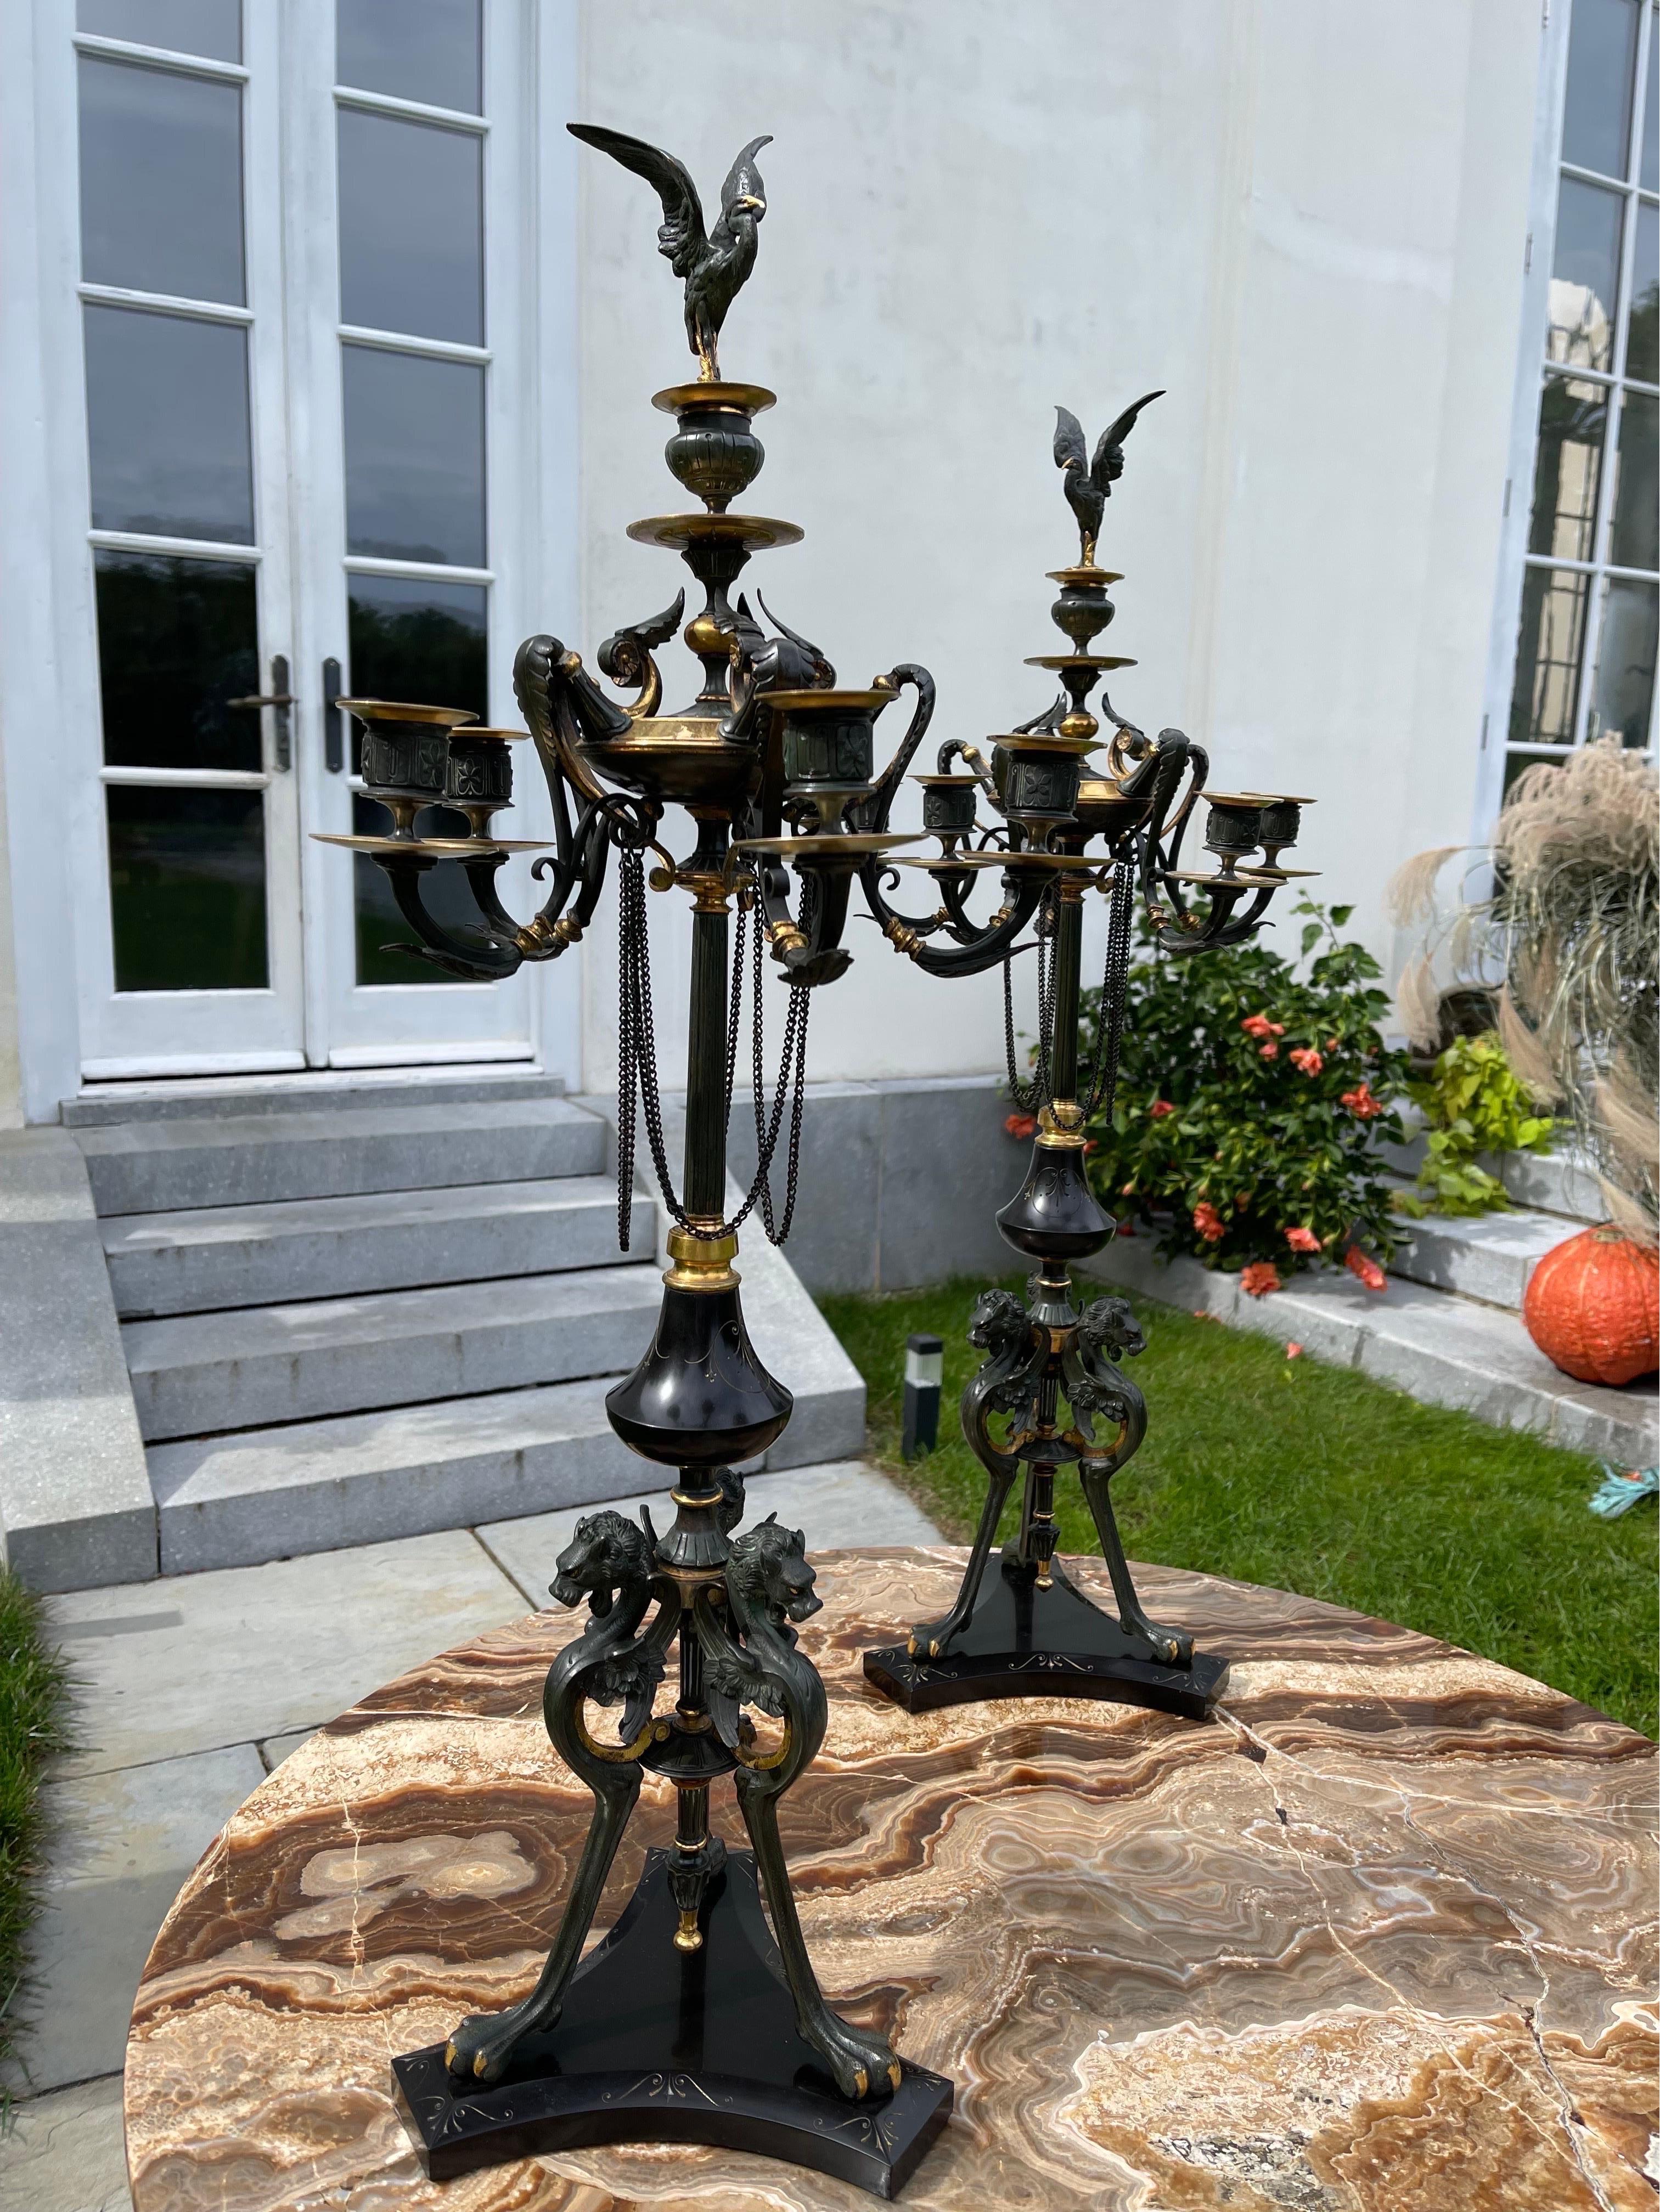 This Magnificent Pair of six arm neo-classical Candelabra represents some of the finest craftsmanships of the Time. 
Produced in Paris by one of the finest bronziers Ferdinand Barbedienne, ca 1870.
Each element of the arms and candle cups are